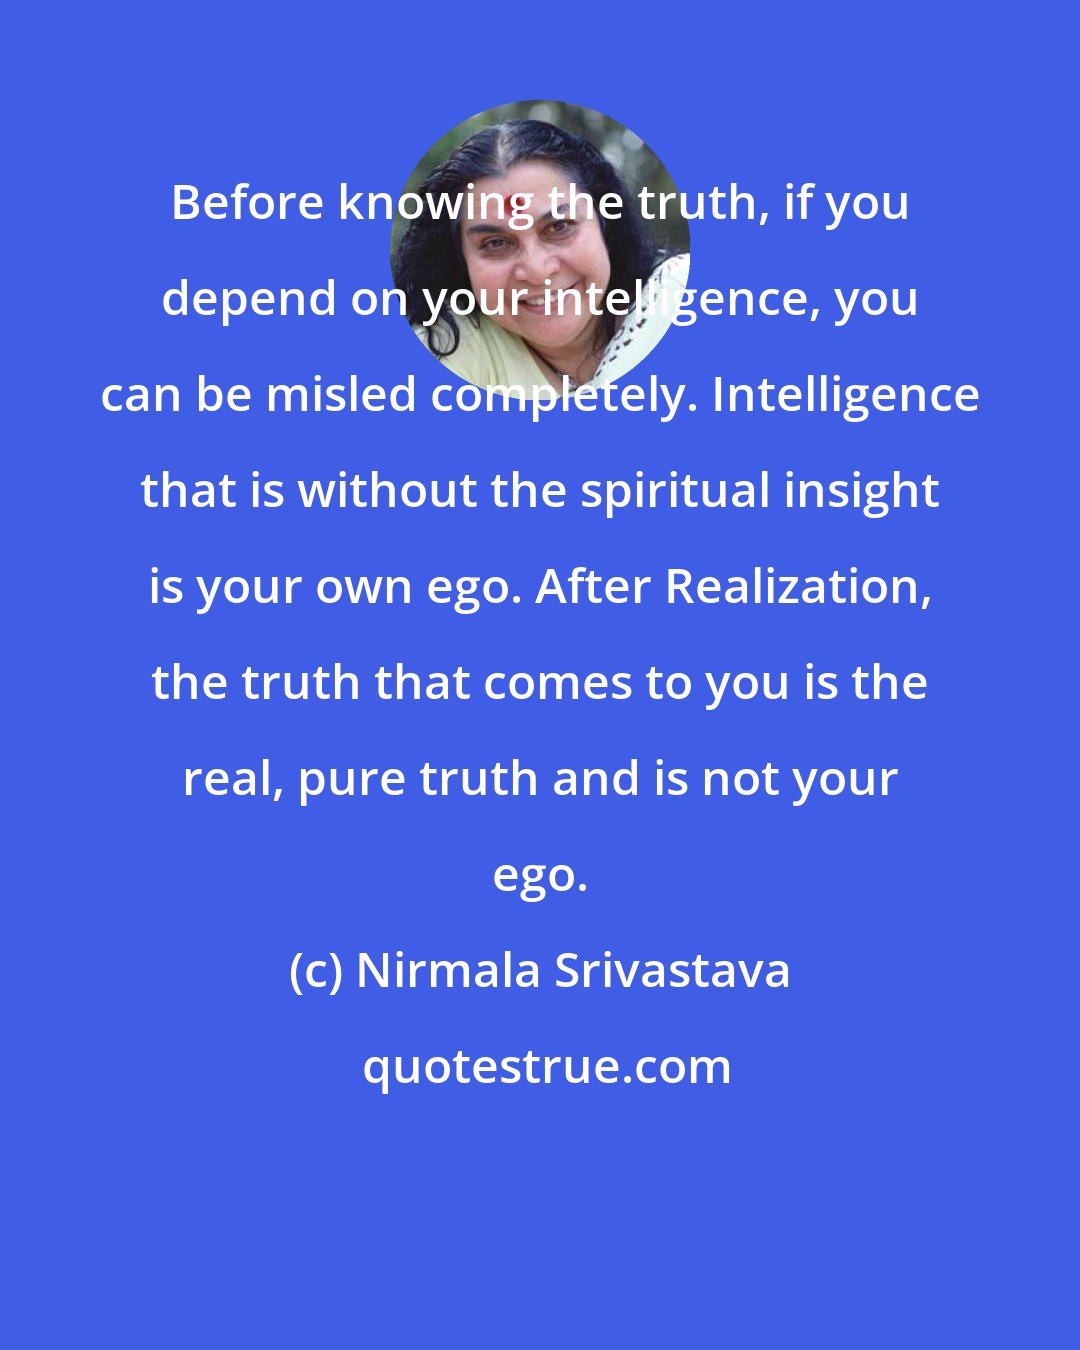 Nirmala Srivastava: Before knowing the truth, if you depend on your intelligence, you can be misled completely. Intelligence that is without the spiritual insight is your own ego. After Realization, the truth that comes to you is the real, pure truth and is not your ego.